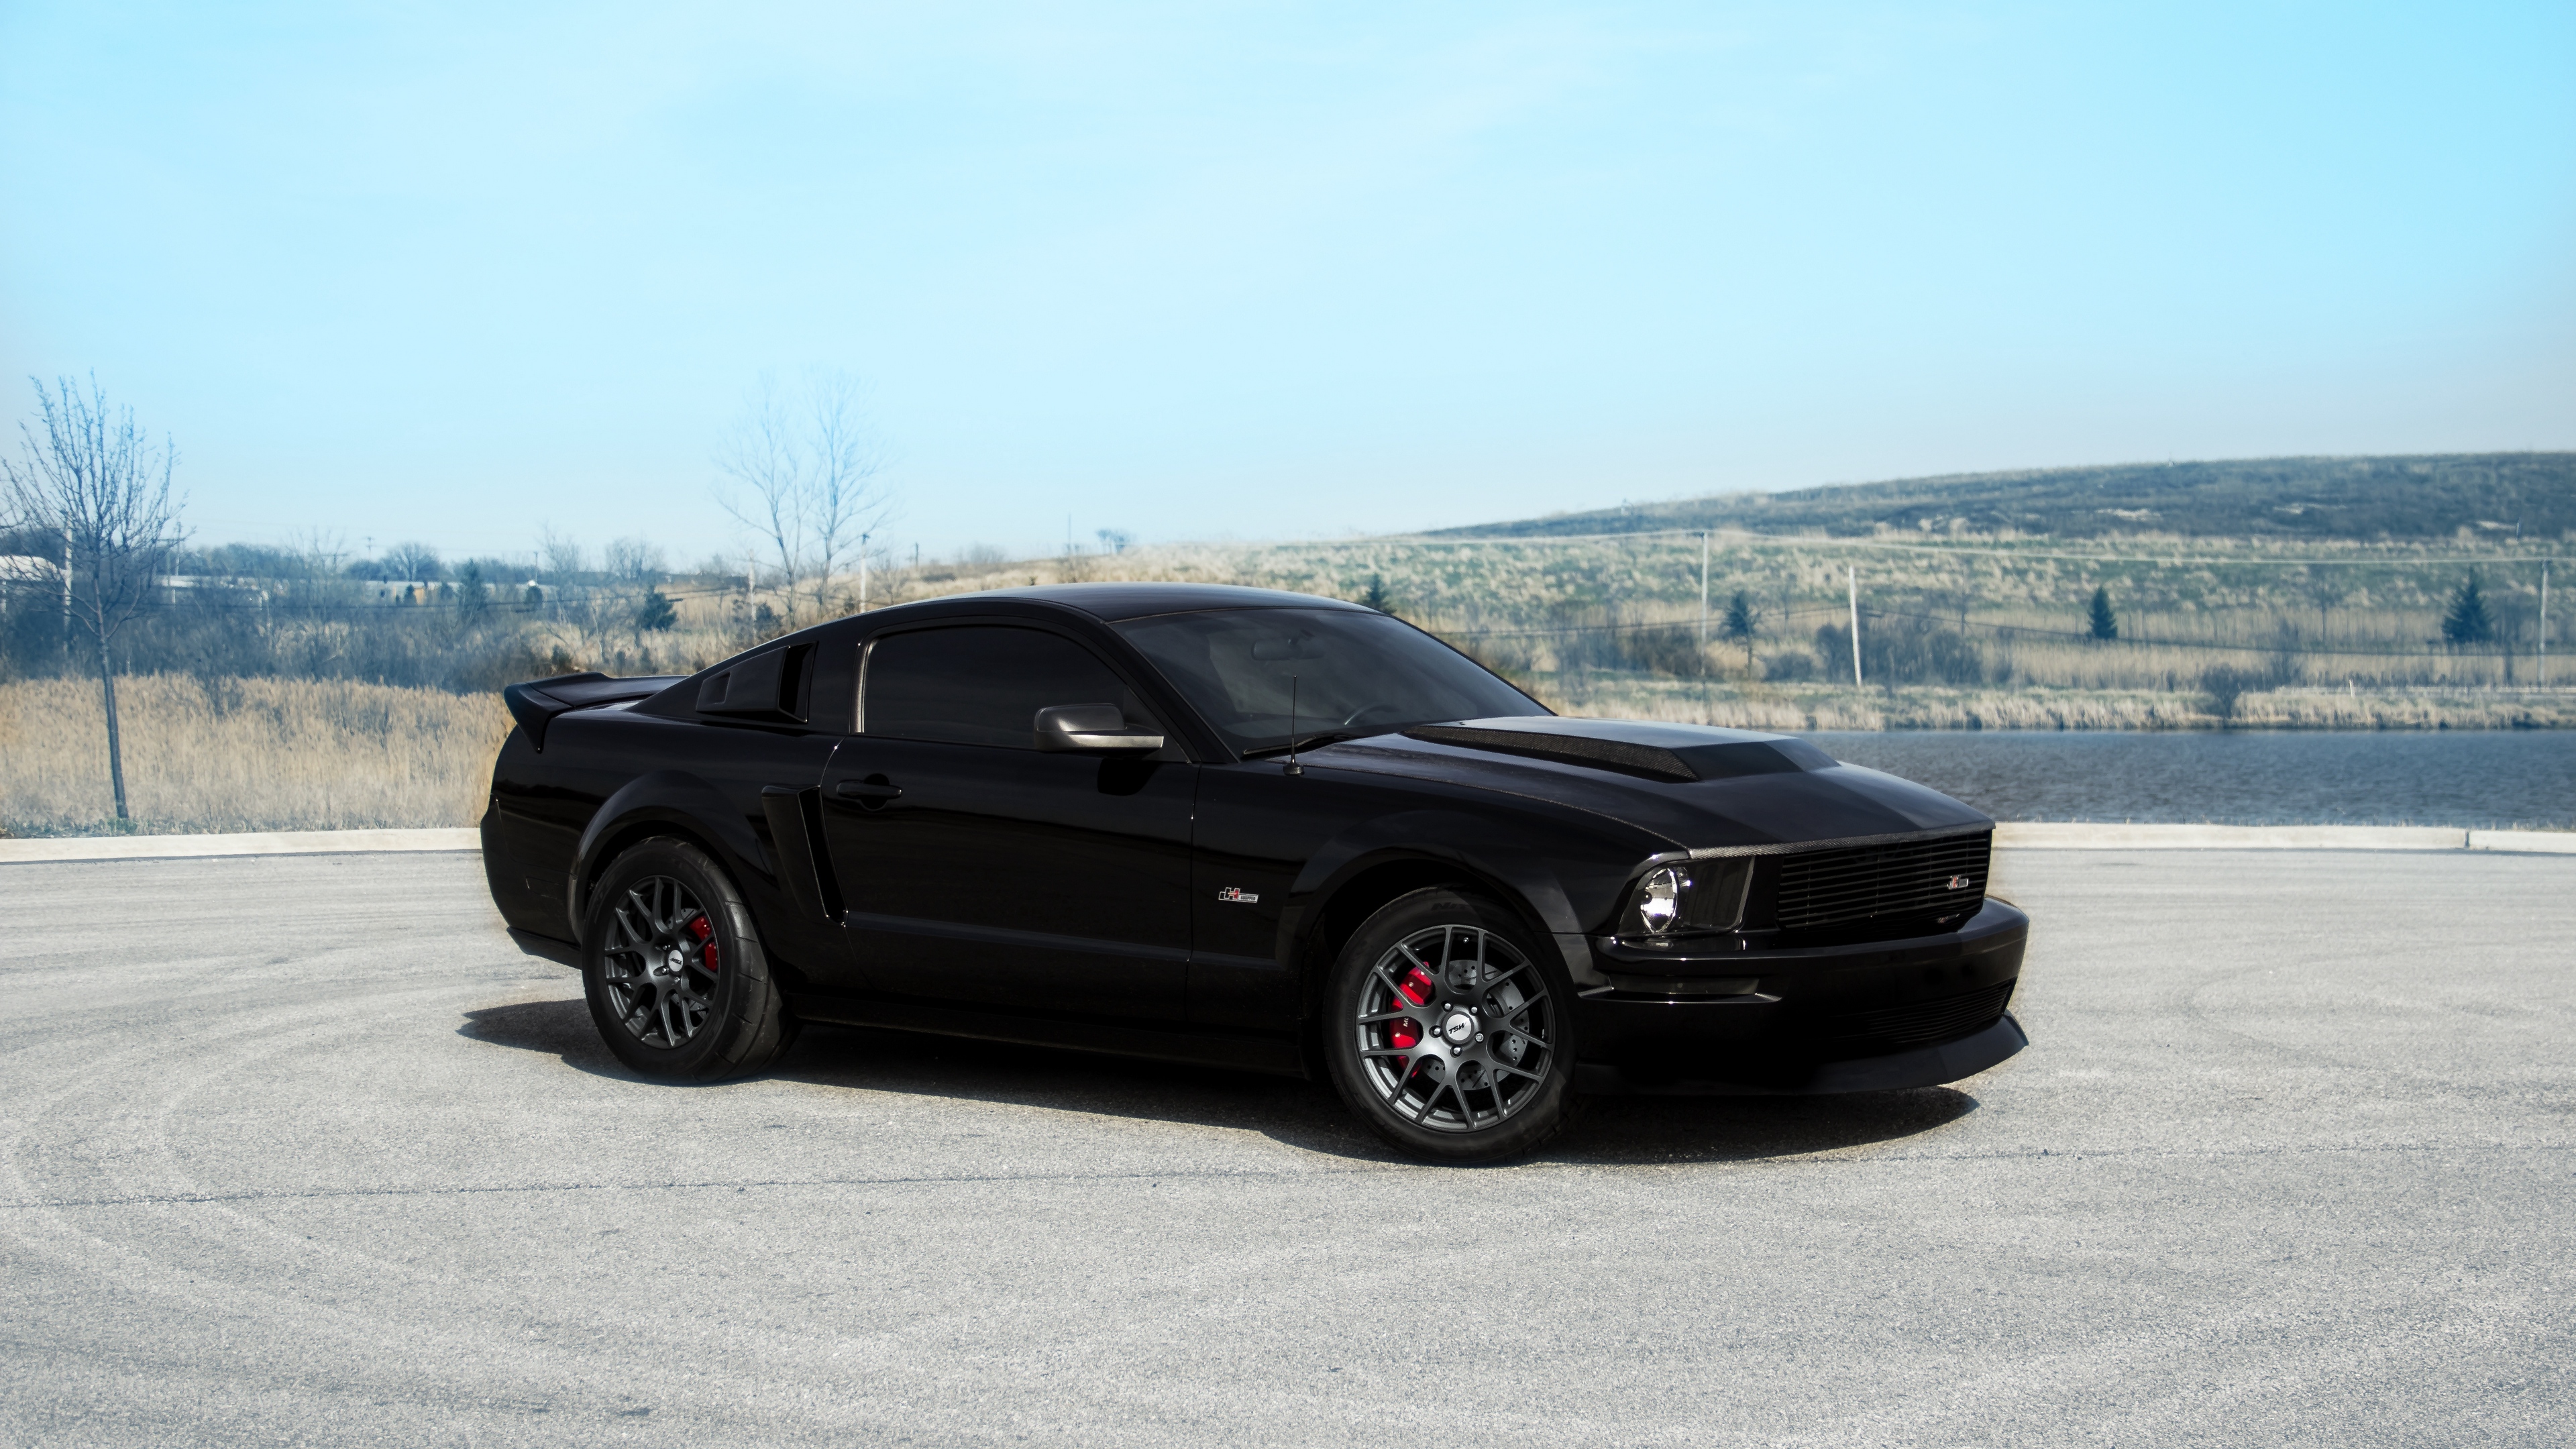 HD wallpaper Ford Ford Mustang Black Car Muscle Car Vehicle  Wallpaper  Flare